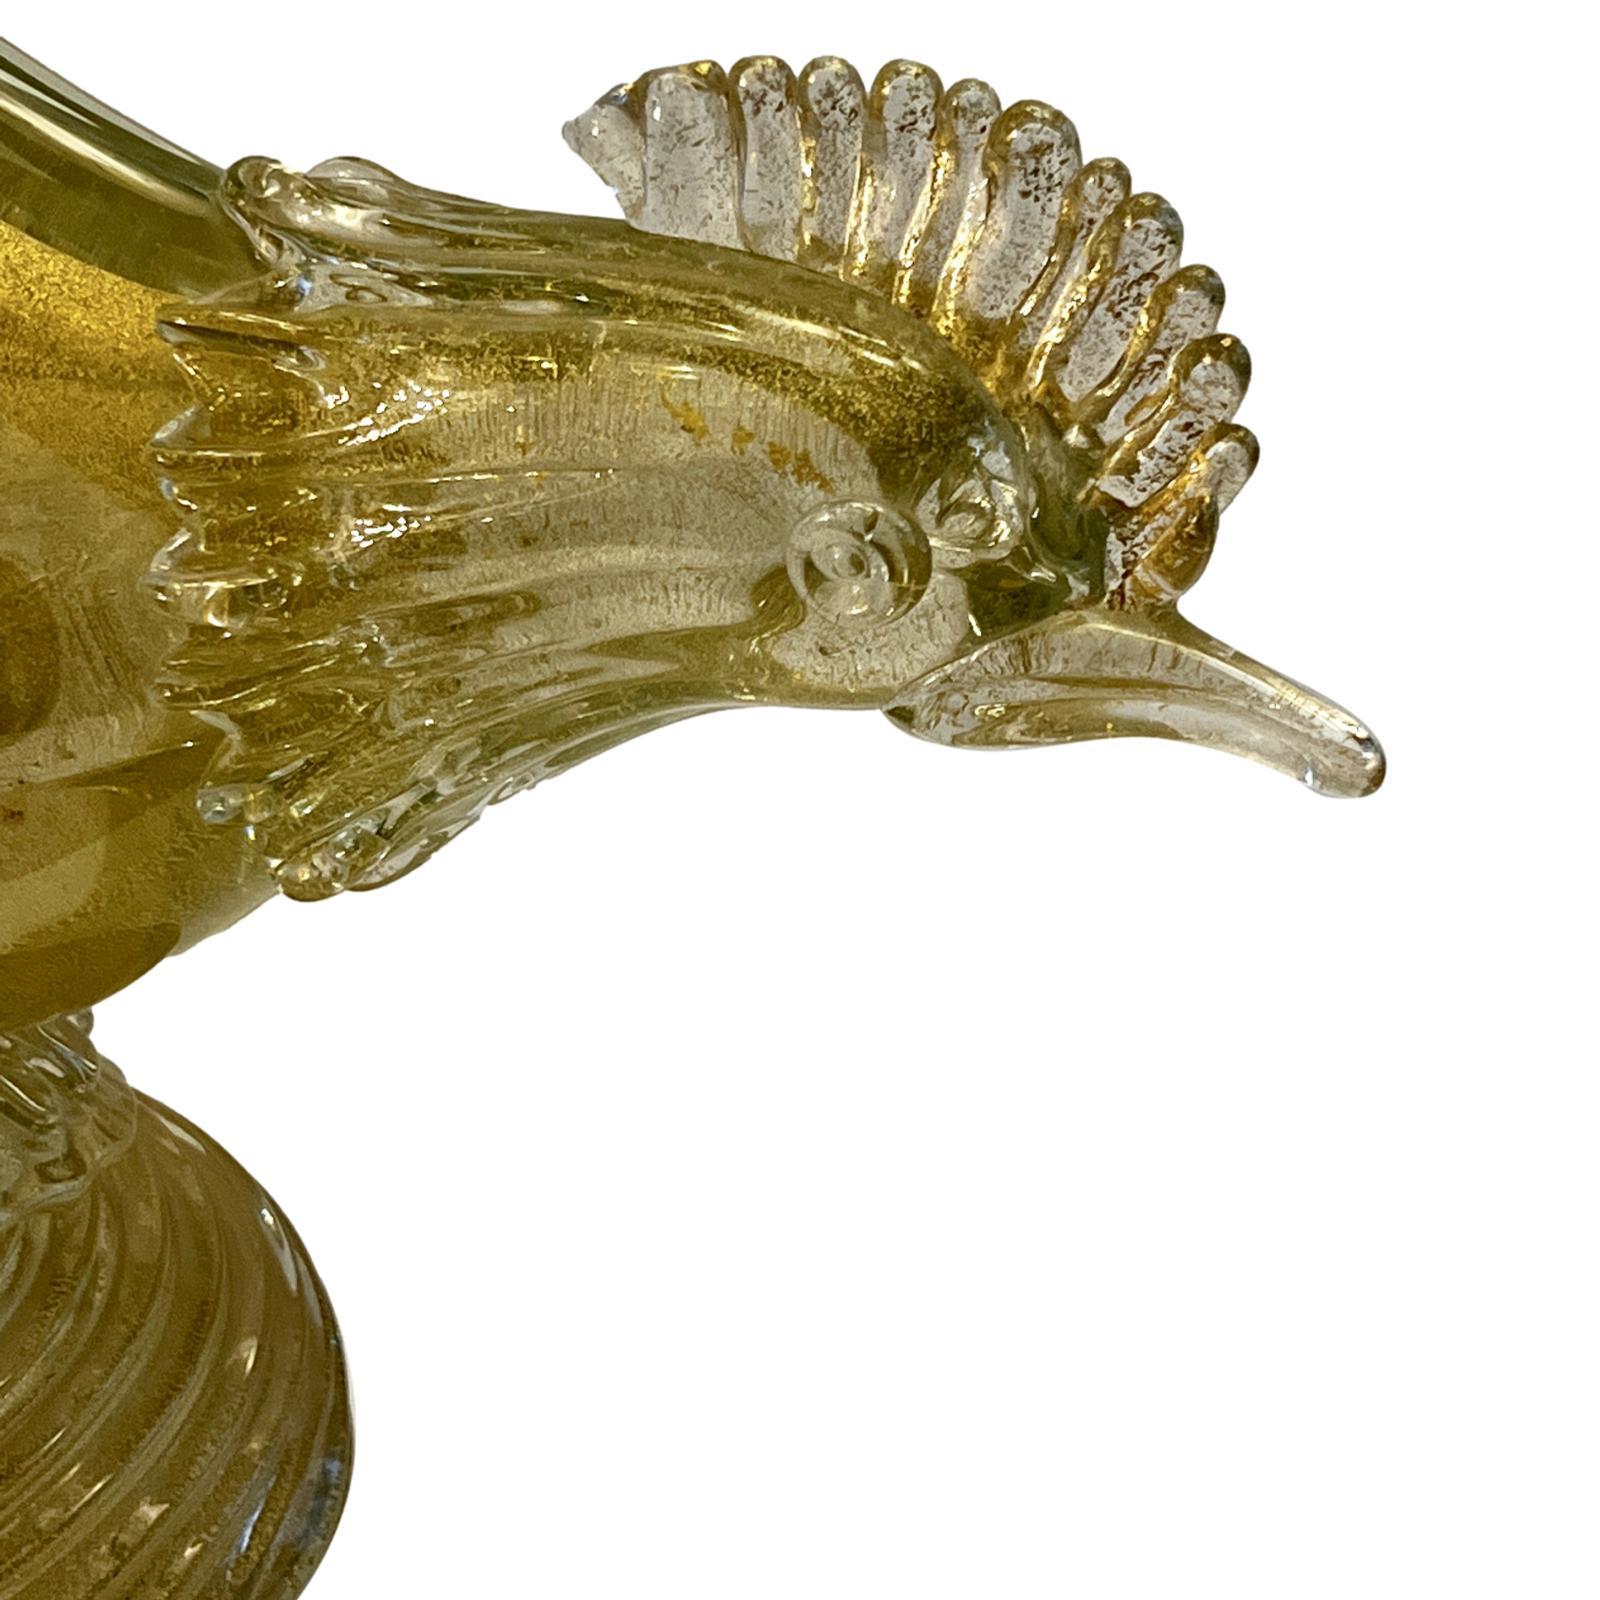 A pair of Italian circa 1960's blown gold and clear glass pheasants.

Measurements:
Height: 19